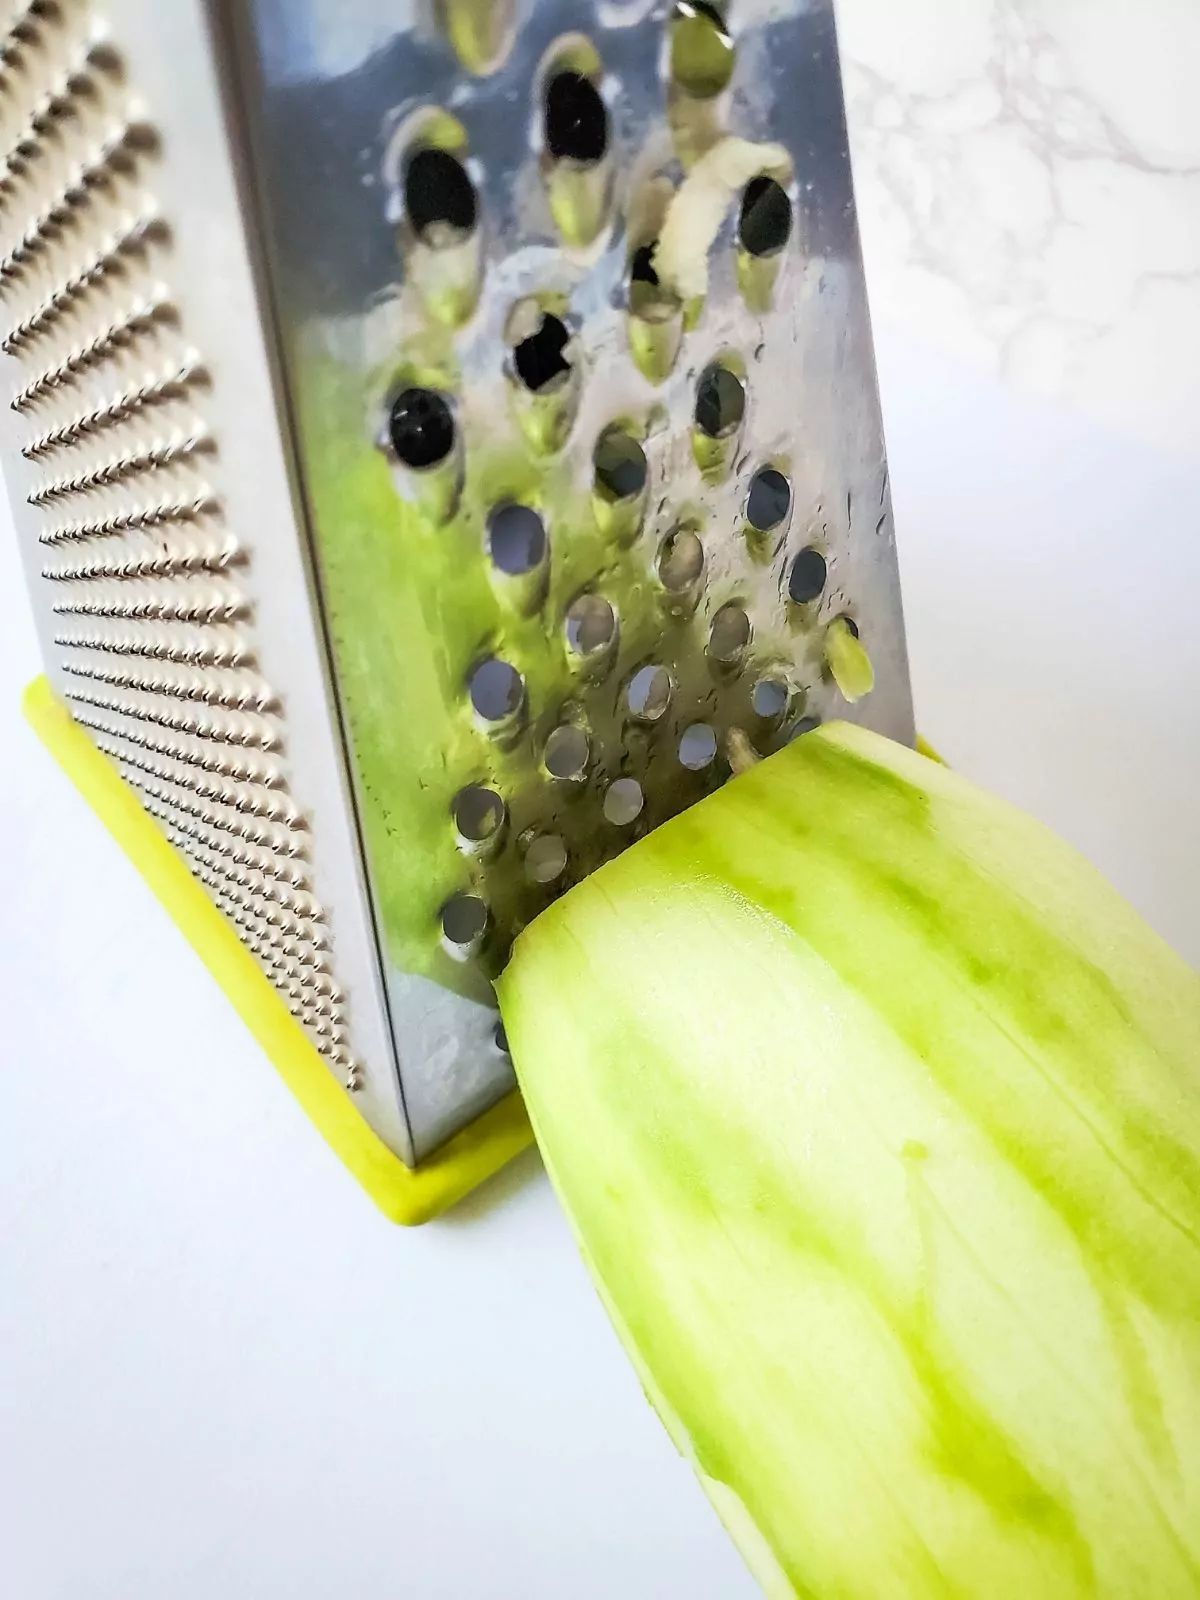 using a box grater to grate zucchini.